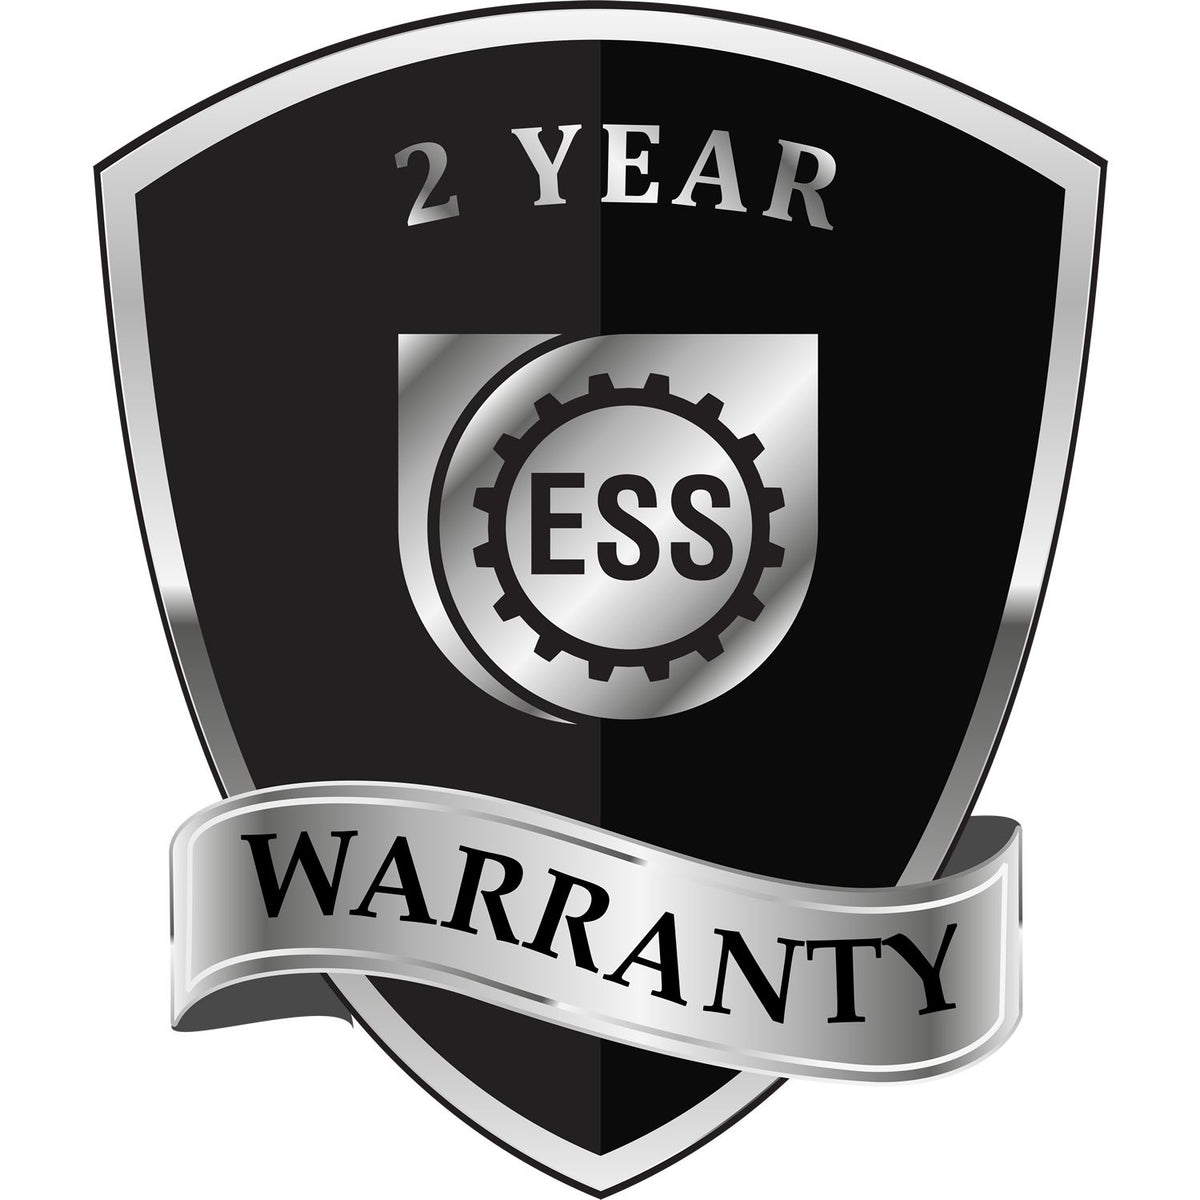 A badge or emblem showing a warranty icon for the State of Utah Long Reach Architectural Embossing Seal